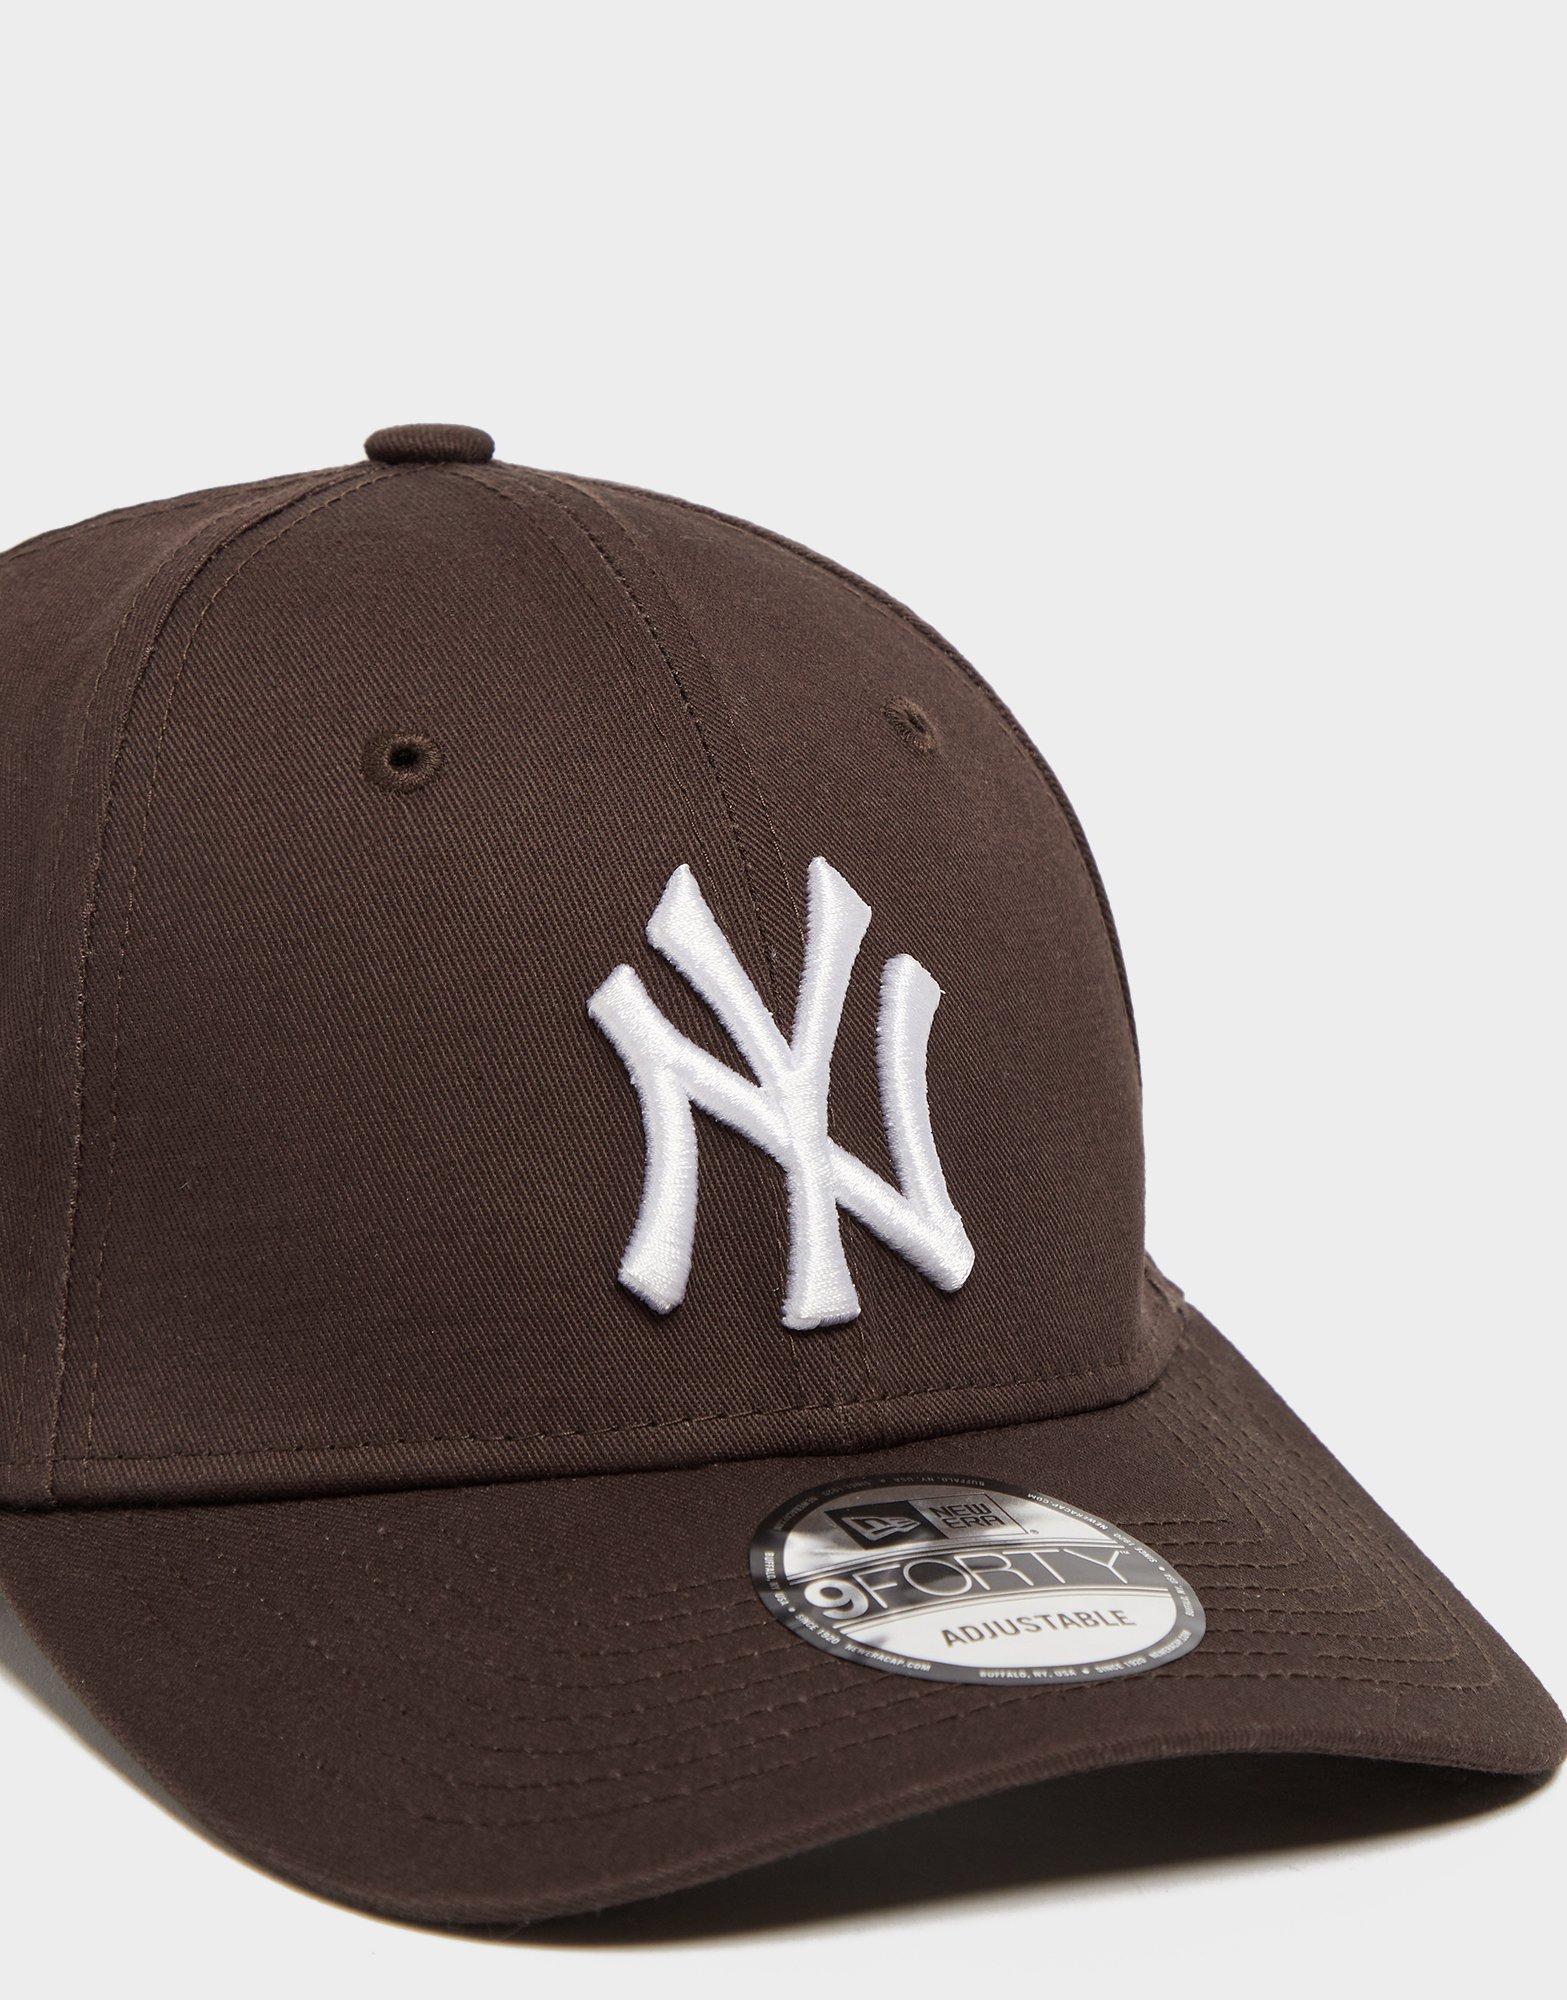 New Era t-shirt WMNS League Essential MLB New York Yankees pink Female, CLOTHES & ACCESORIES \ T-Shirts \ T-Shirts BRANDS \ New Era *WOMEN \ T- Shirts